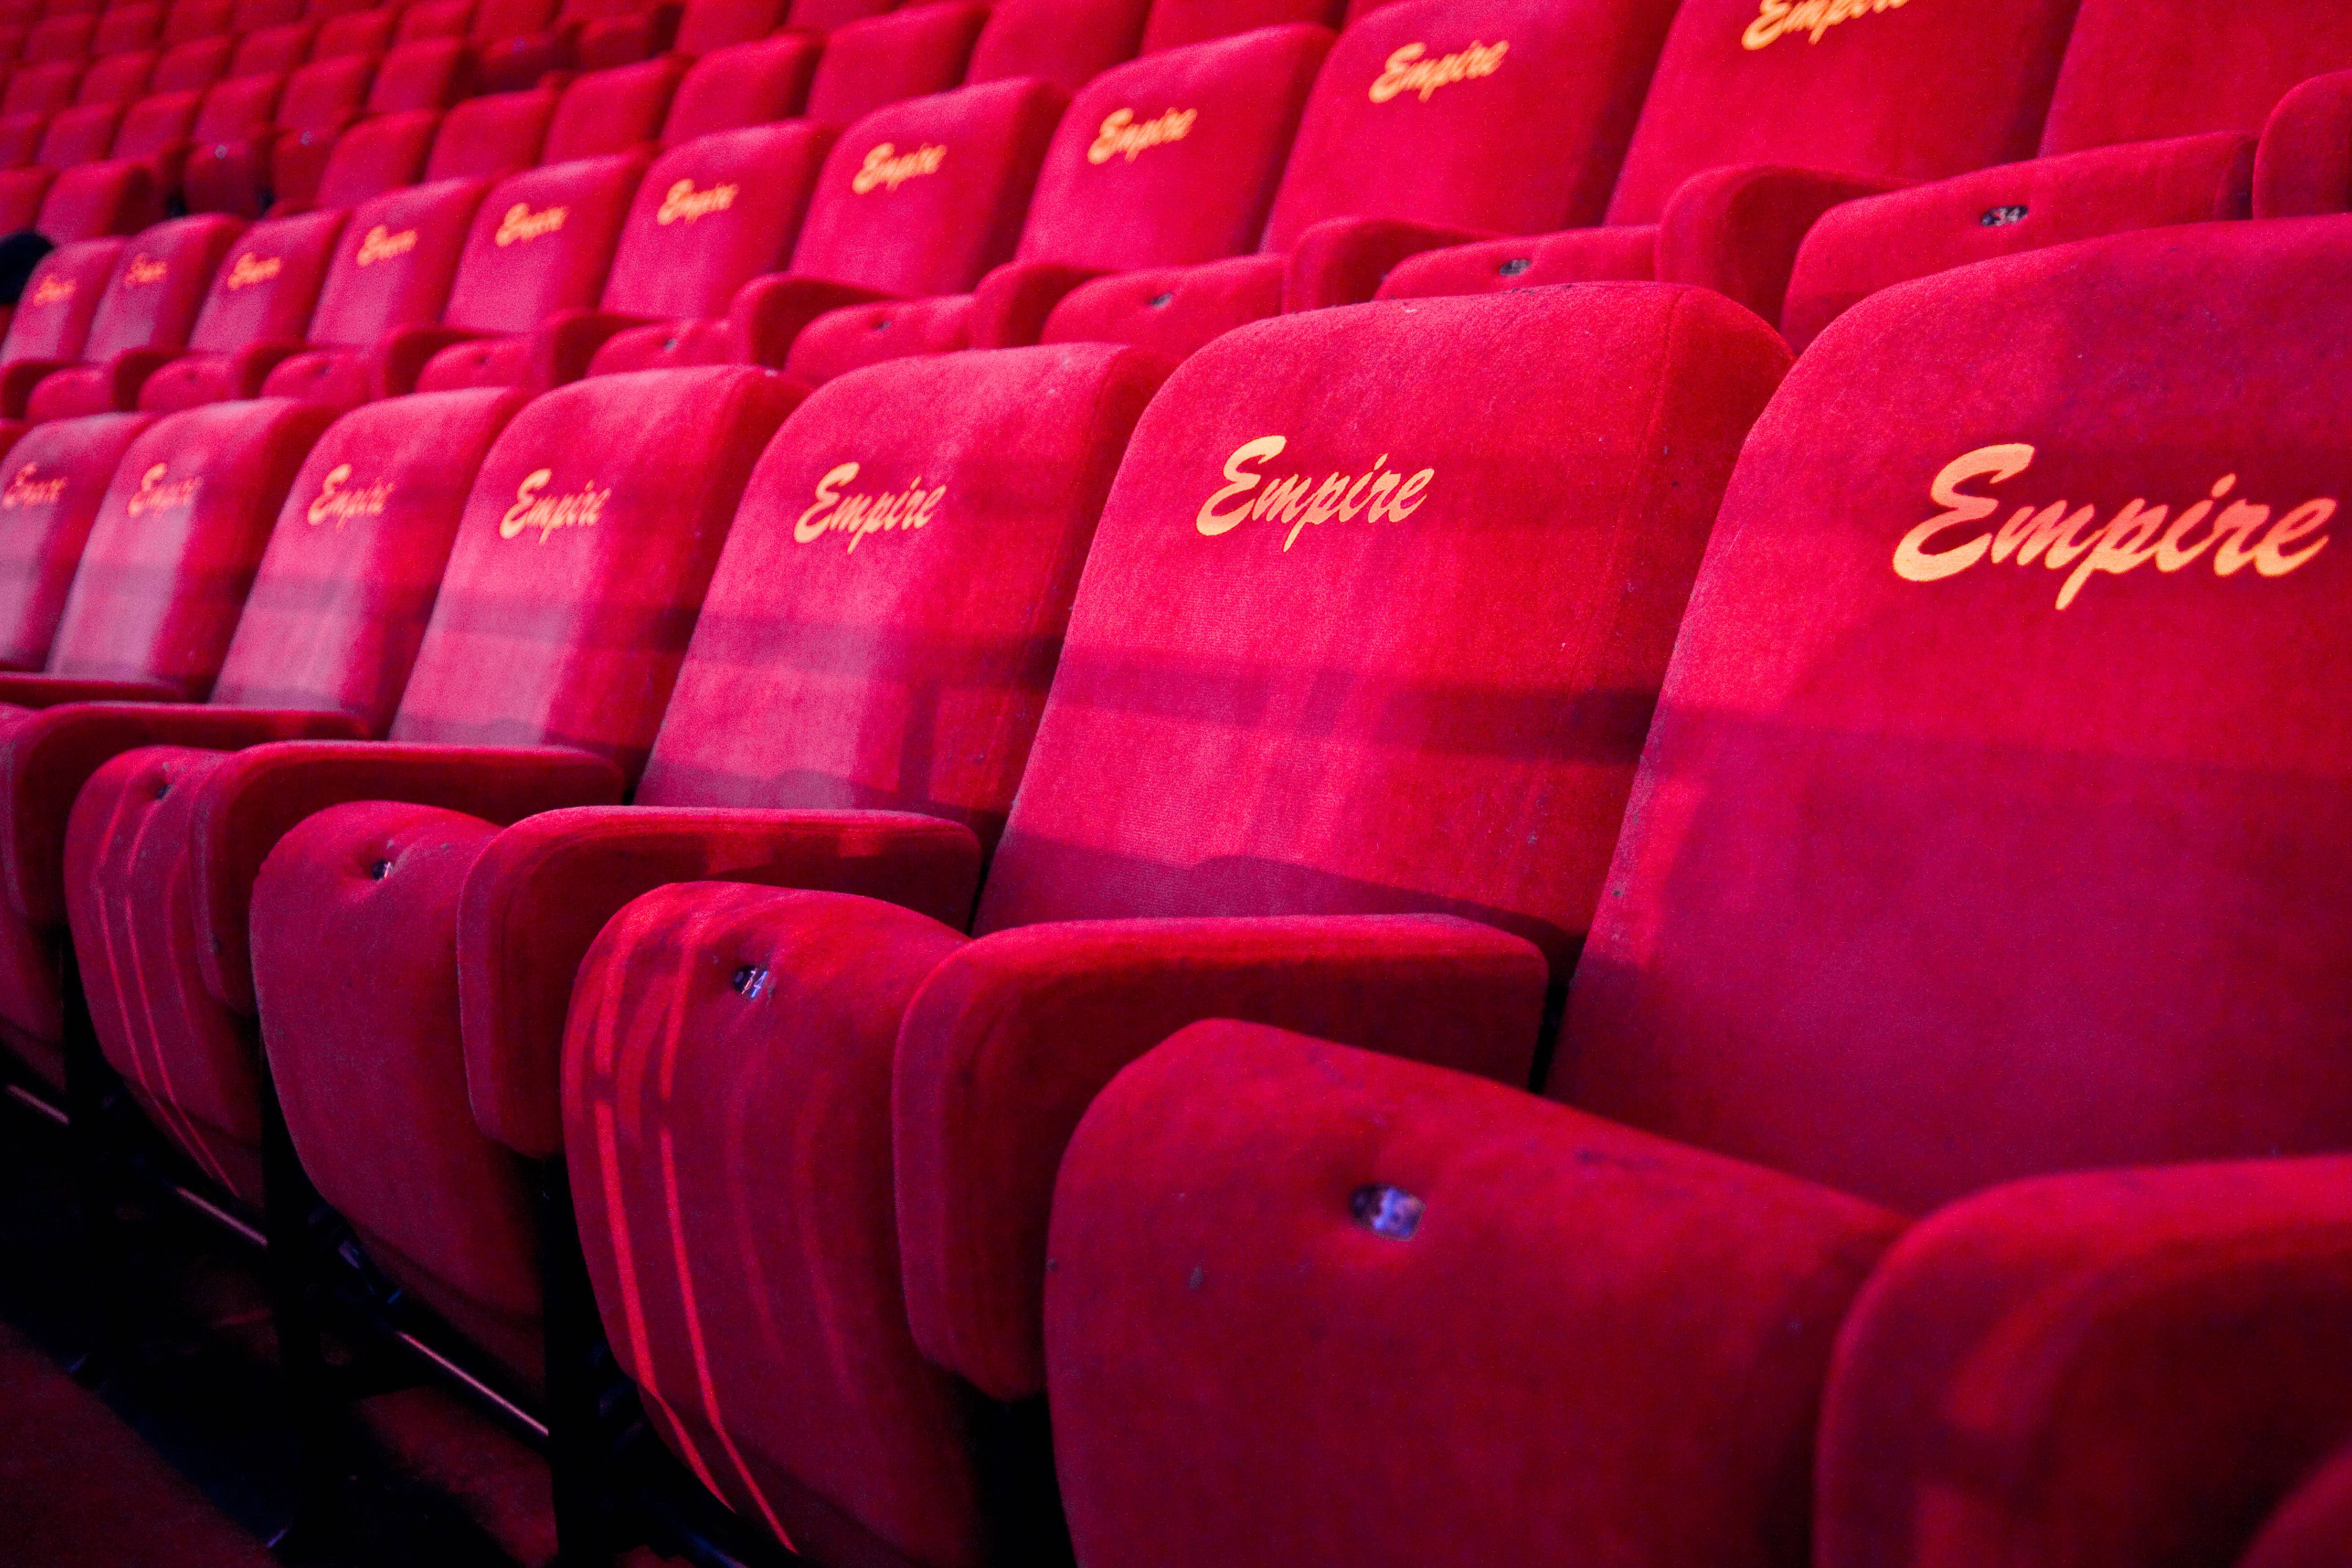 The Empire Cinemas chain has collapsed into administration